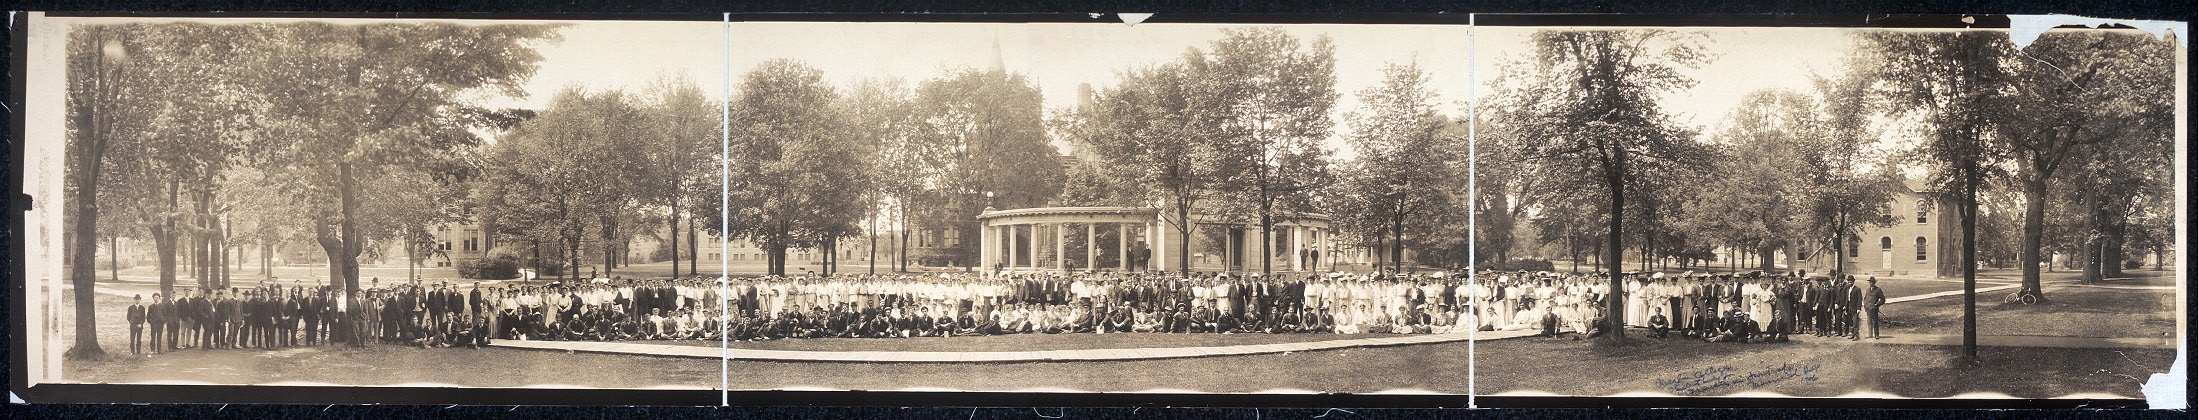 Oberlin College scene, student body & faculty in front of...